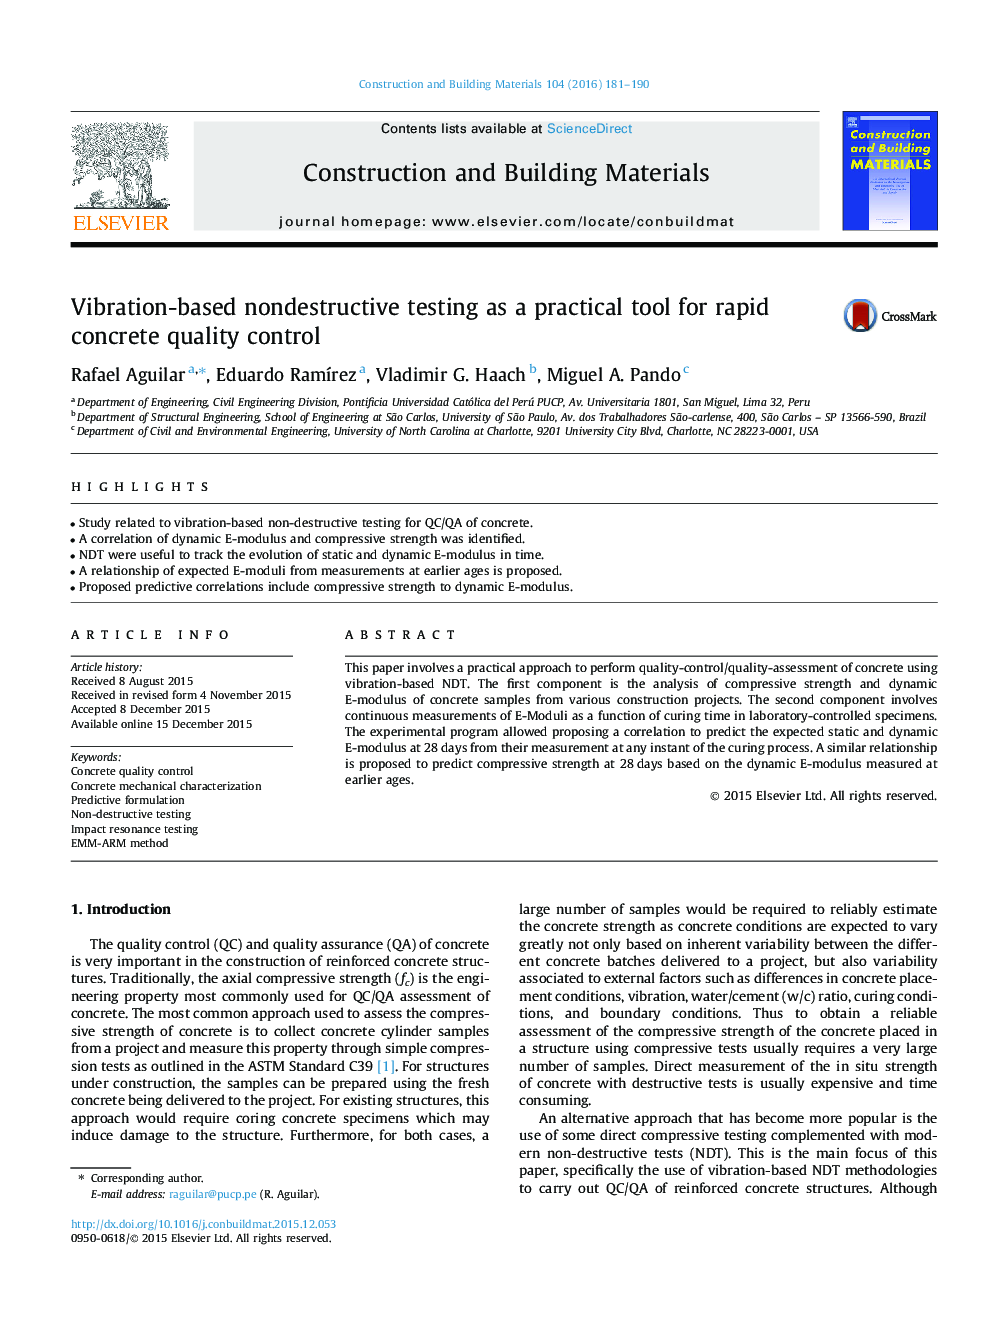 Vibration-based nondestructive testing as a practical tool for rapid concrete quality control